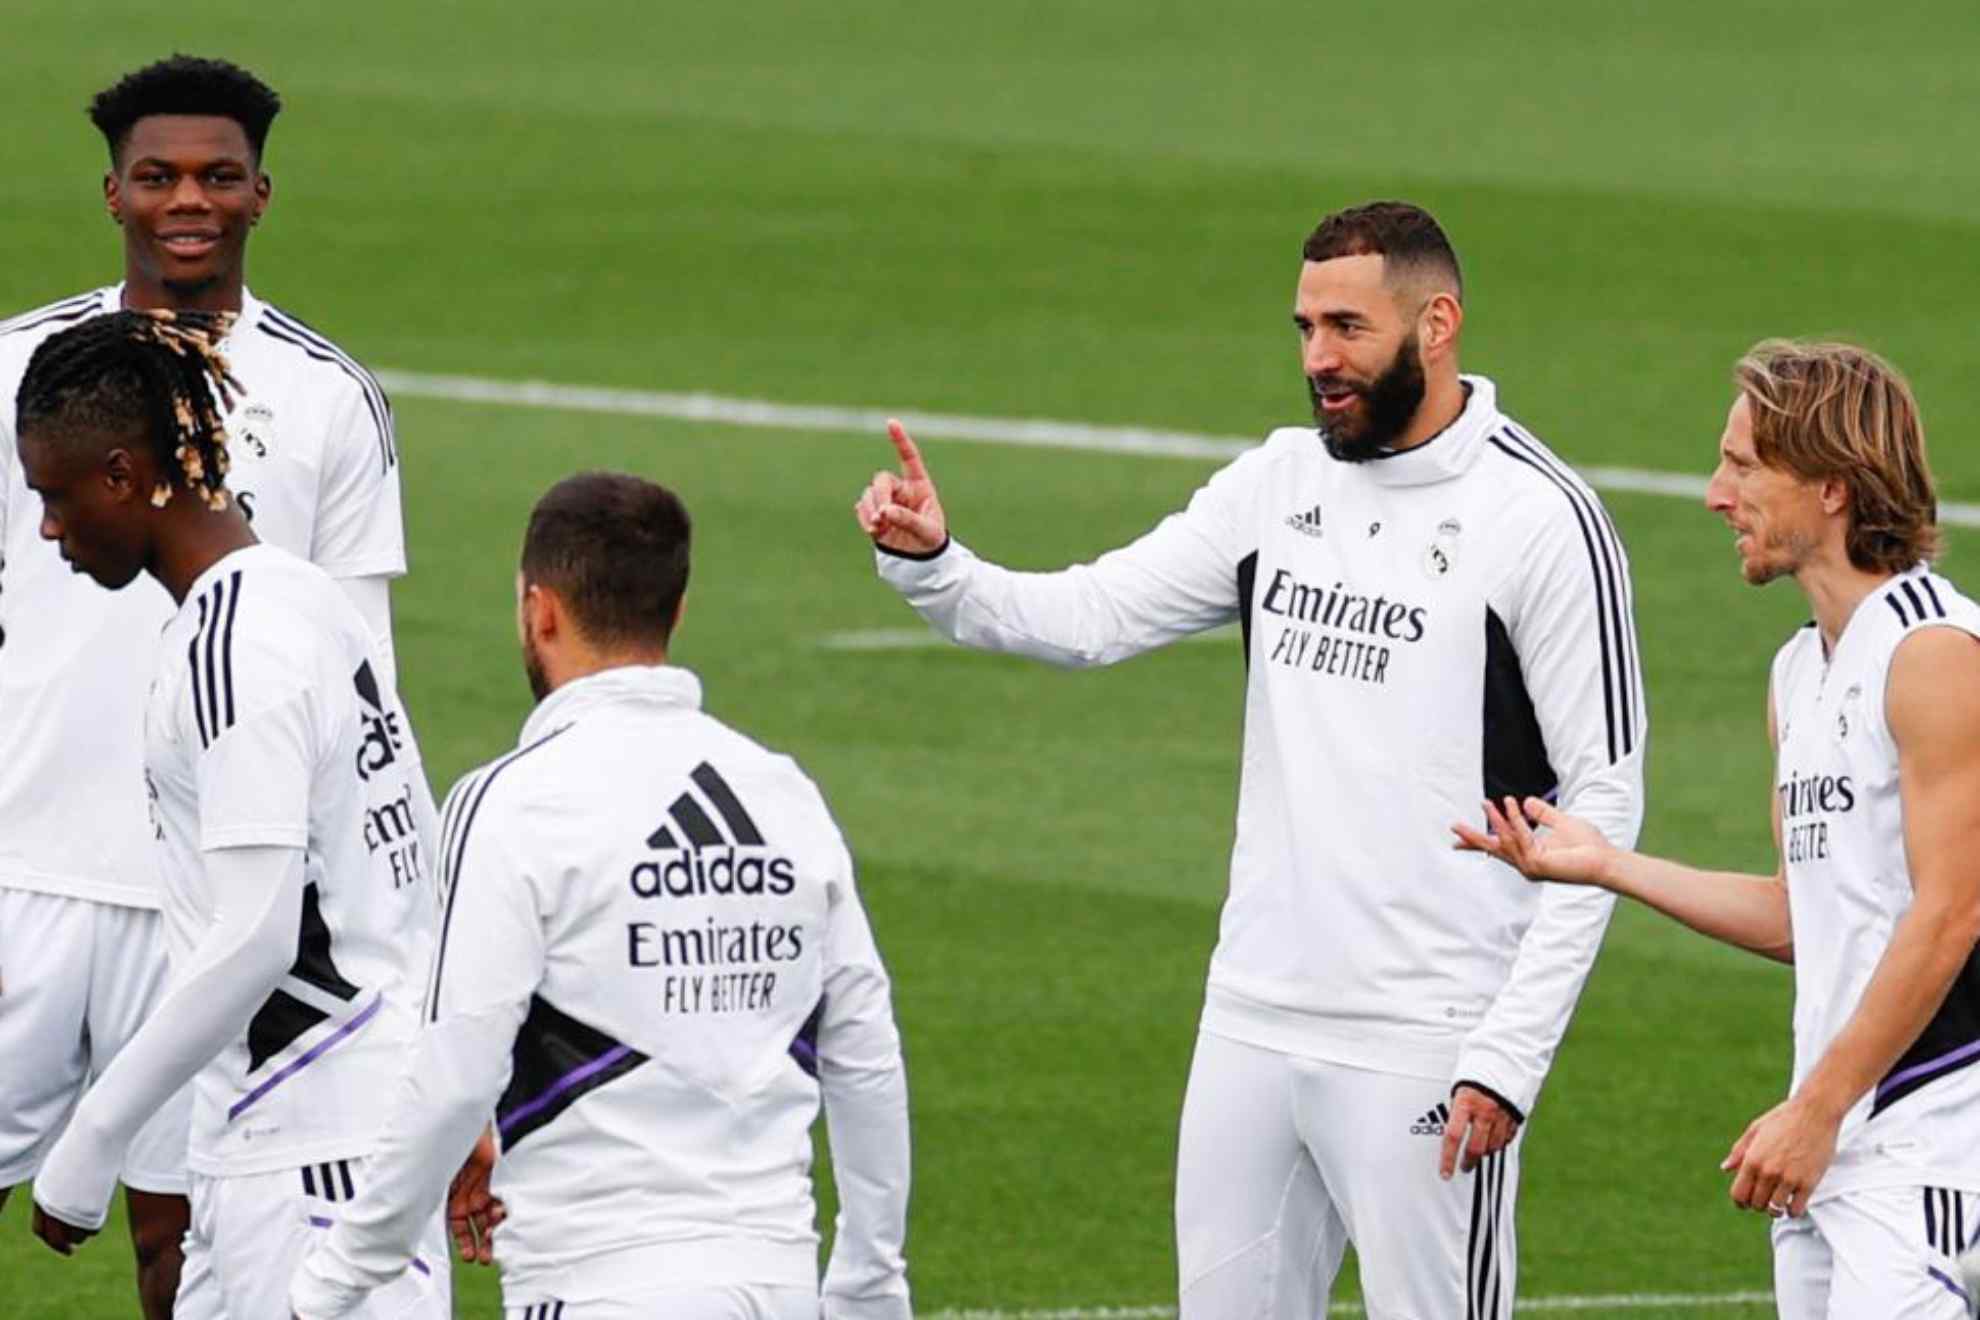 Benzema to miss out for Real Madrid against Sevilla and RB Leipzig due to muscle fatigue | Marca